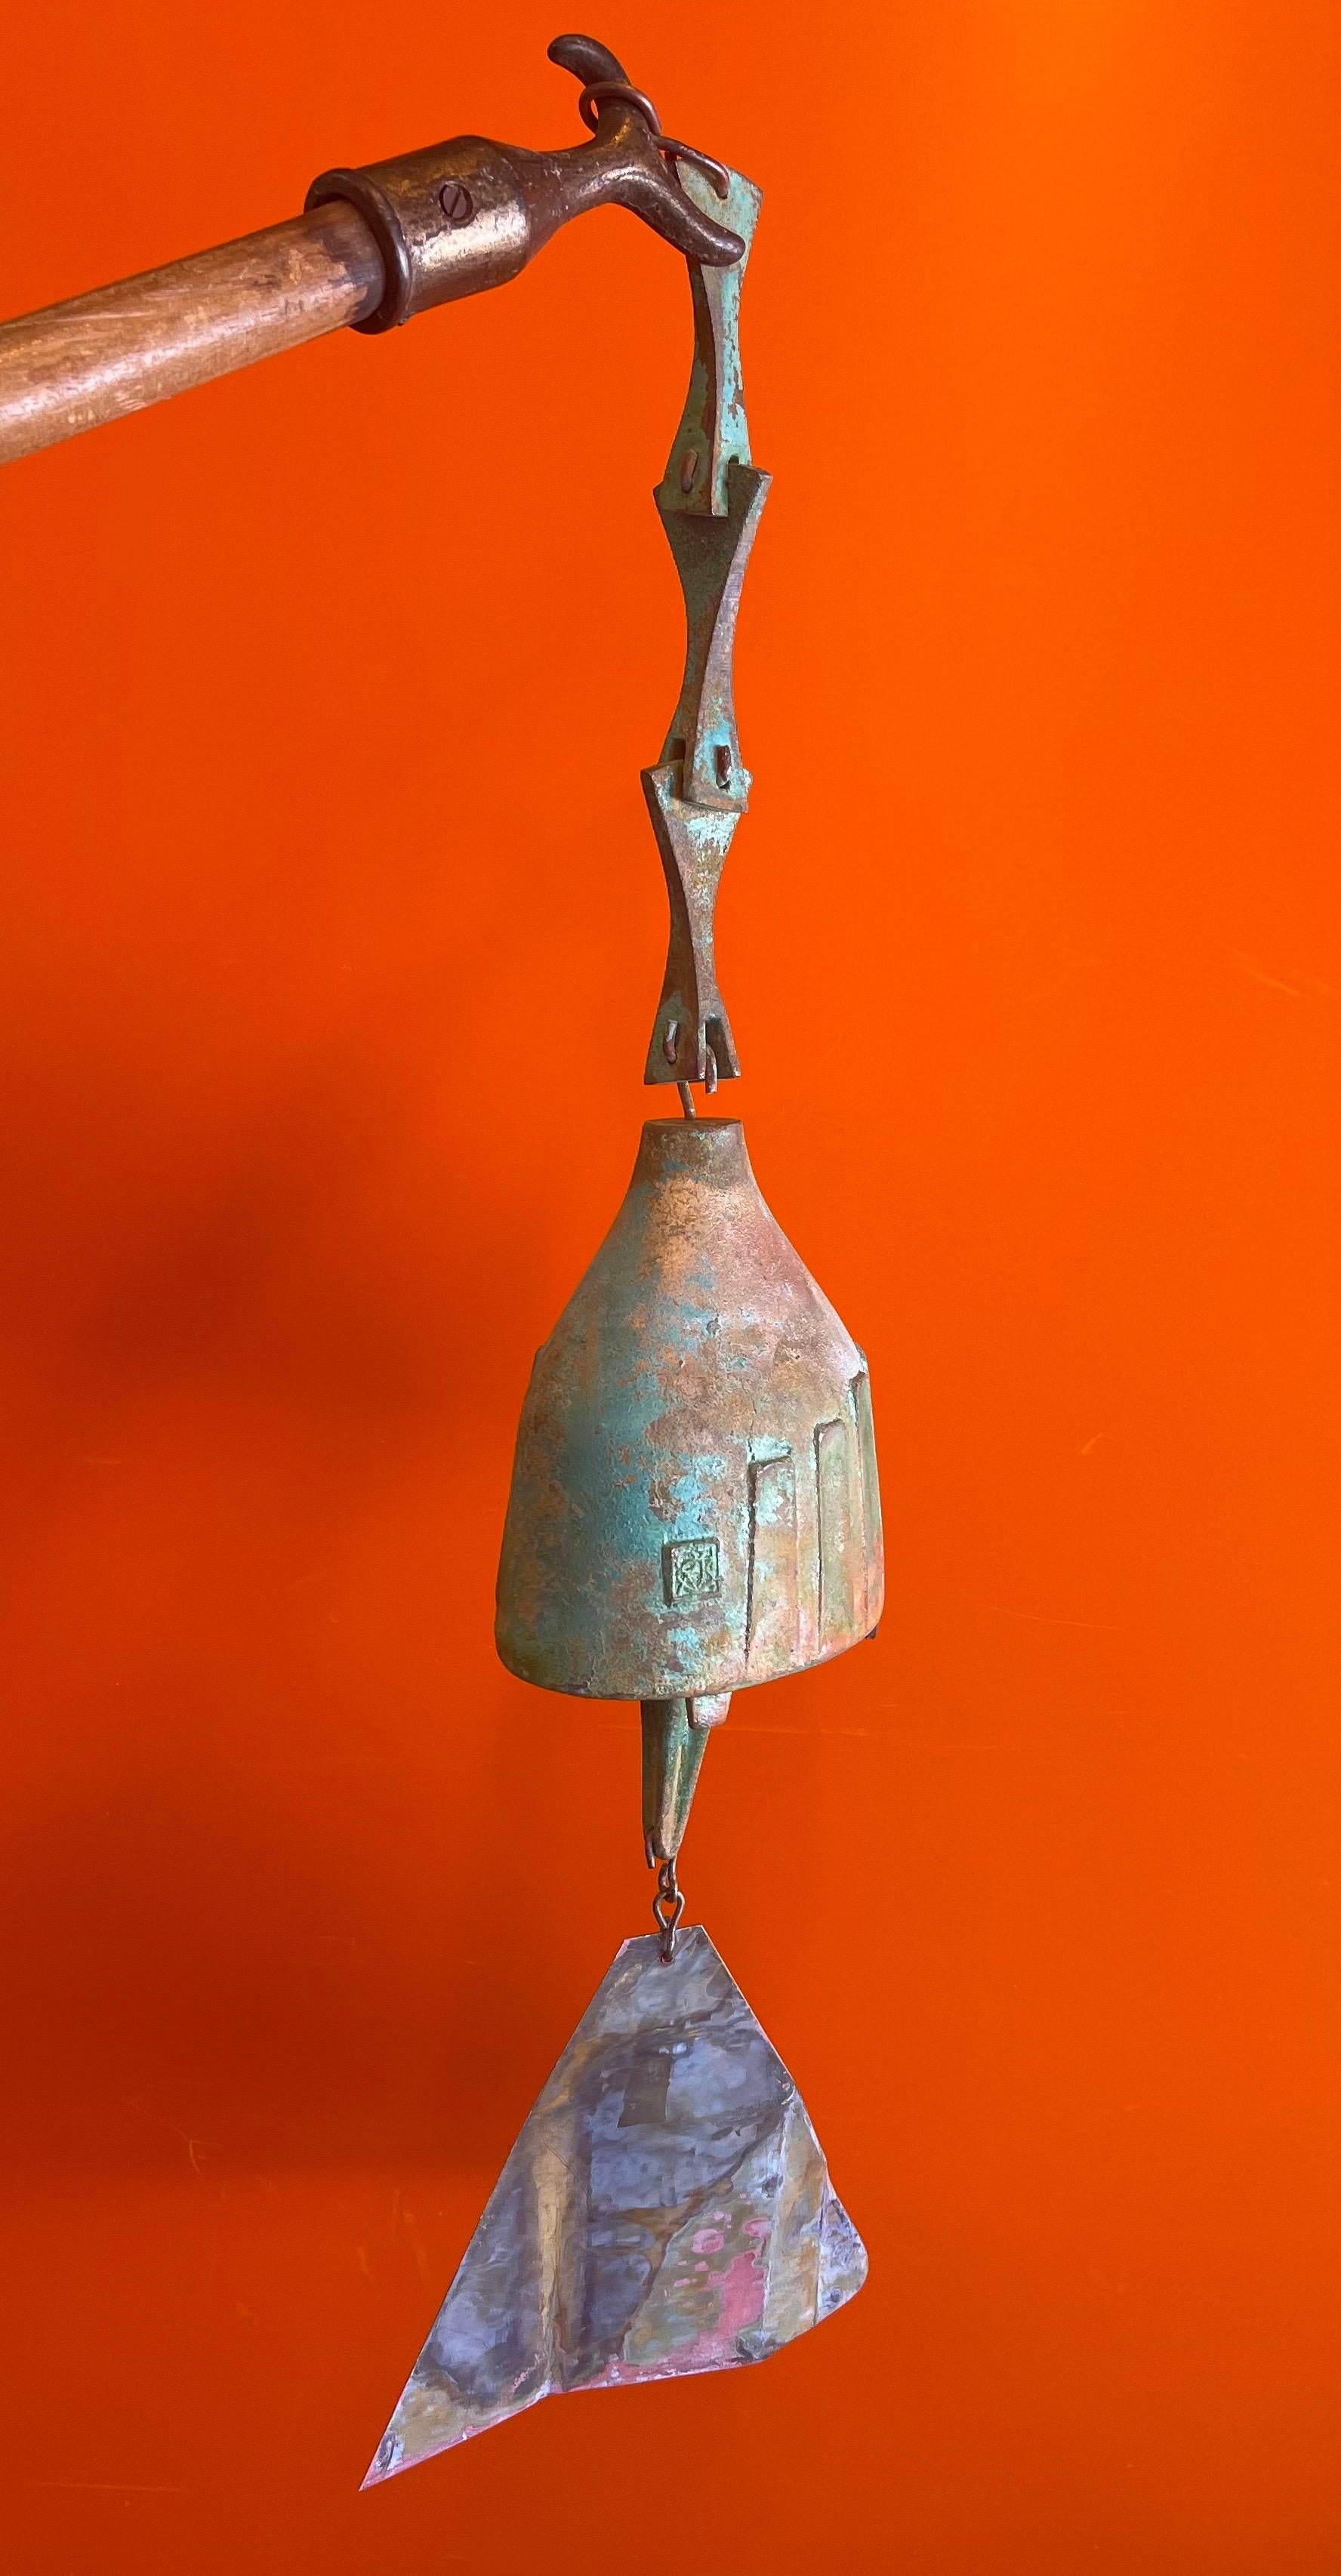 Large bronze Cosanti wind bell with hanging bracket by Paolo Soleri, circa 1980s. The bell has a beautiful patina with rich teal, green, brown, red and gray colors. The total length of the piece is 24.5